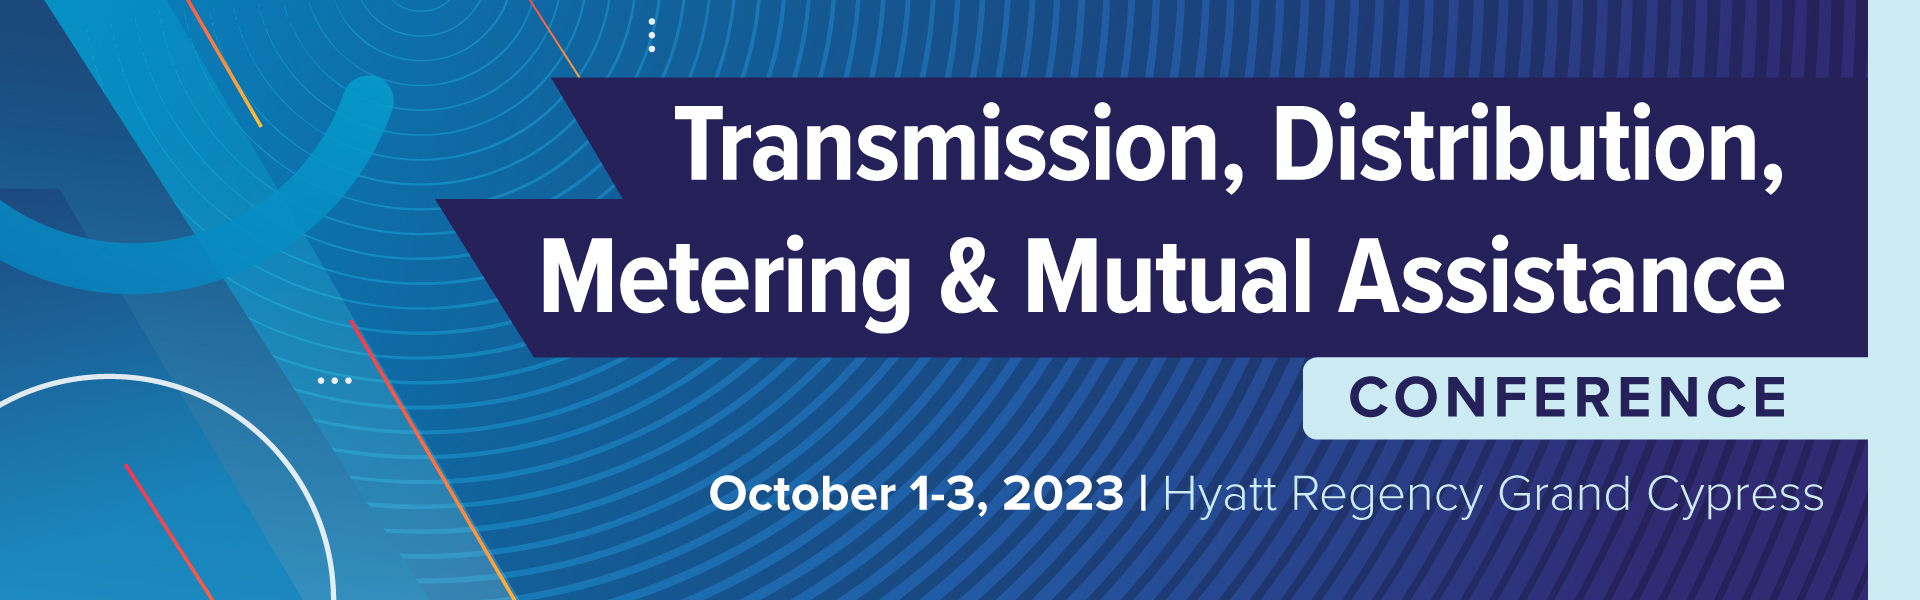 EEI Fall Transmission, Distribution and Metering Conference